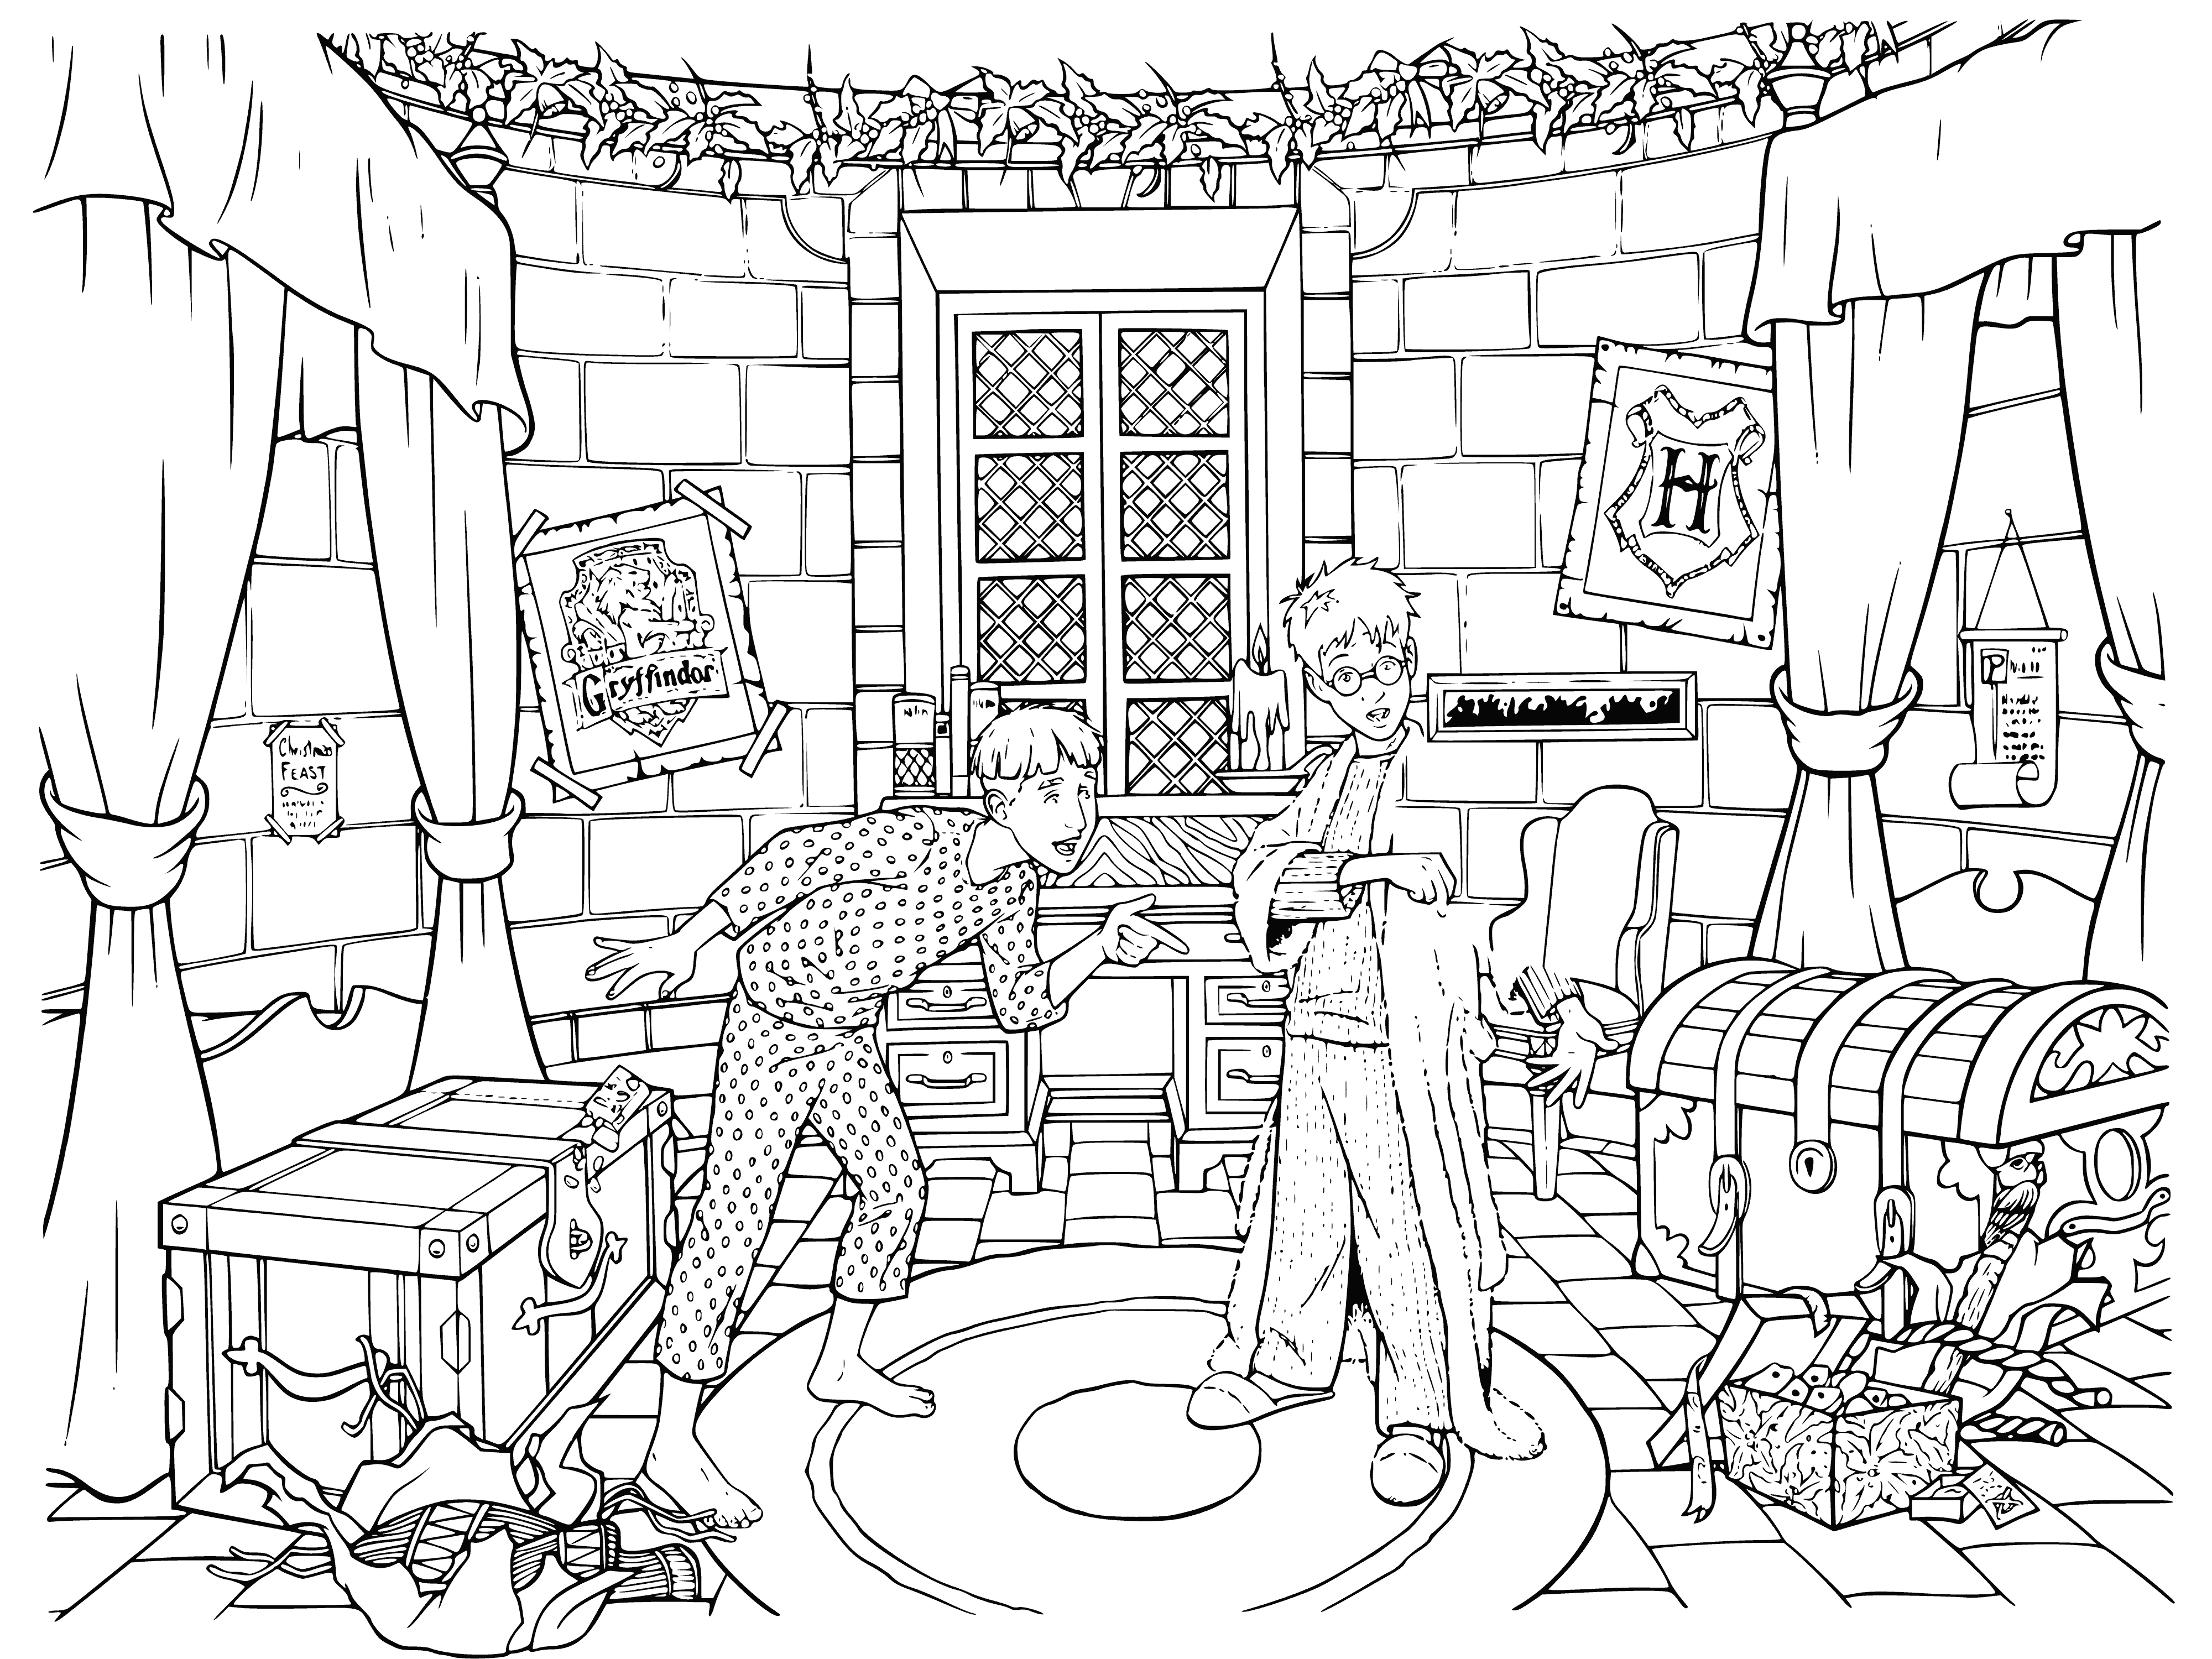 coloring page: Person in center wearing long, black cloak: hold’s hem up, outstretched hand. Faint outline of someone else, as if cloak is making them invisible.